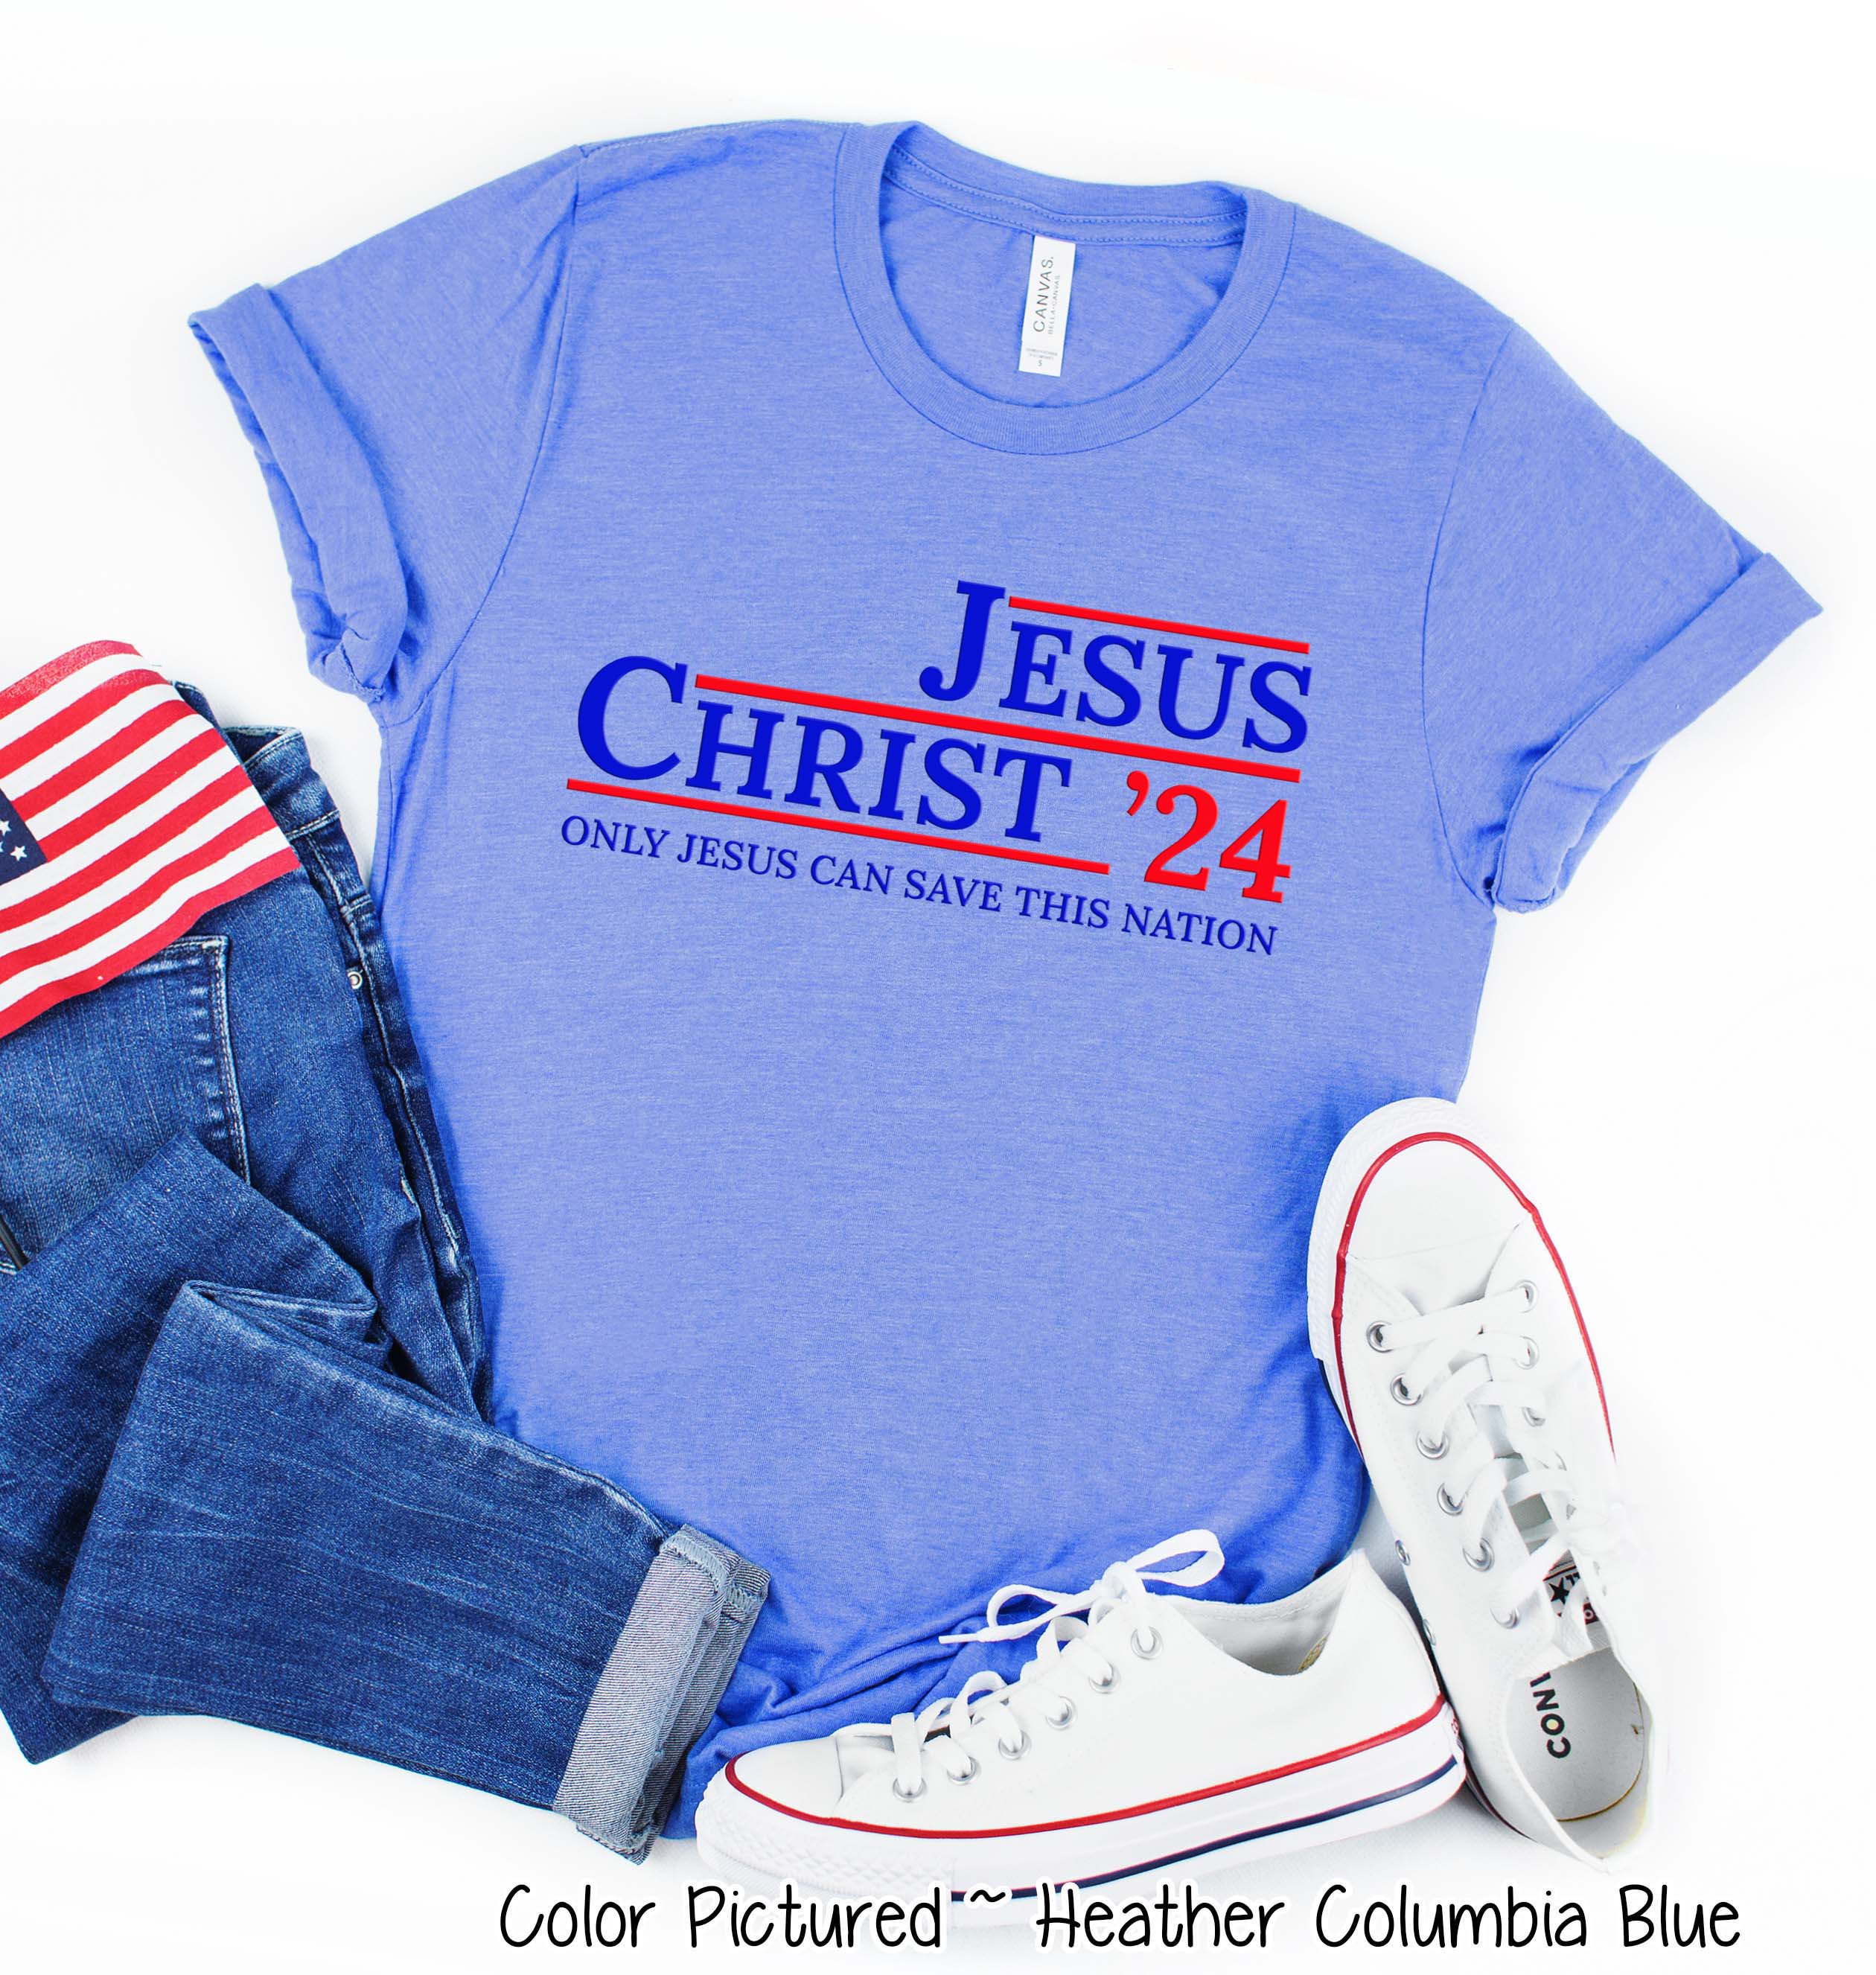 Jesus Christ 2024 Only Jesus Can Save This Nation Tee or Sweatshirt